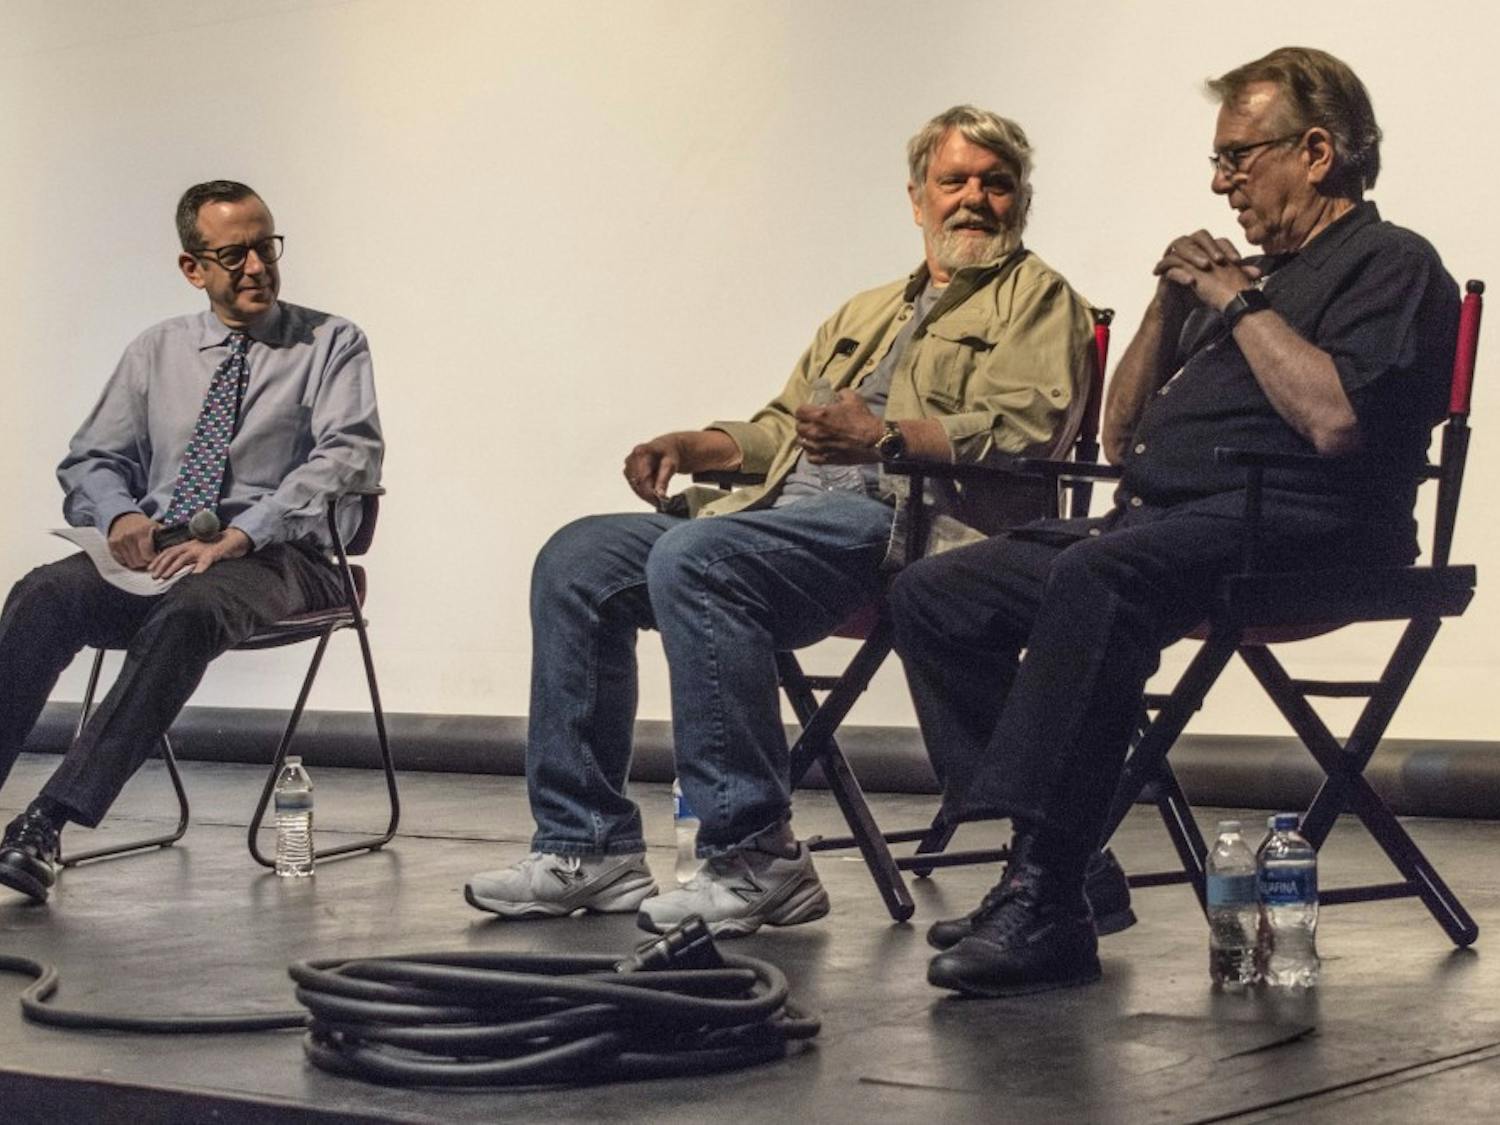 Tom Azzari, right, and Tom Cherones, center, UNM alumni, talk about their experiences working on the set of the television series&nbsp;“Seinfeld” during the "Master of Your Domain" Town Hall hosted at Rodey Theatre, on Tuesday, September 26, 2017. David Weiss, far left, Department Chair of the UNM Communications and Journalism Department moderated the panel discussion.